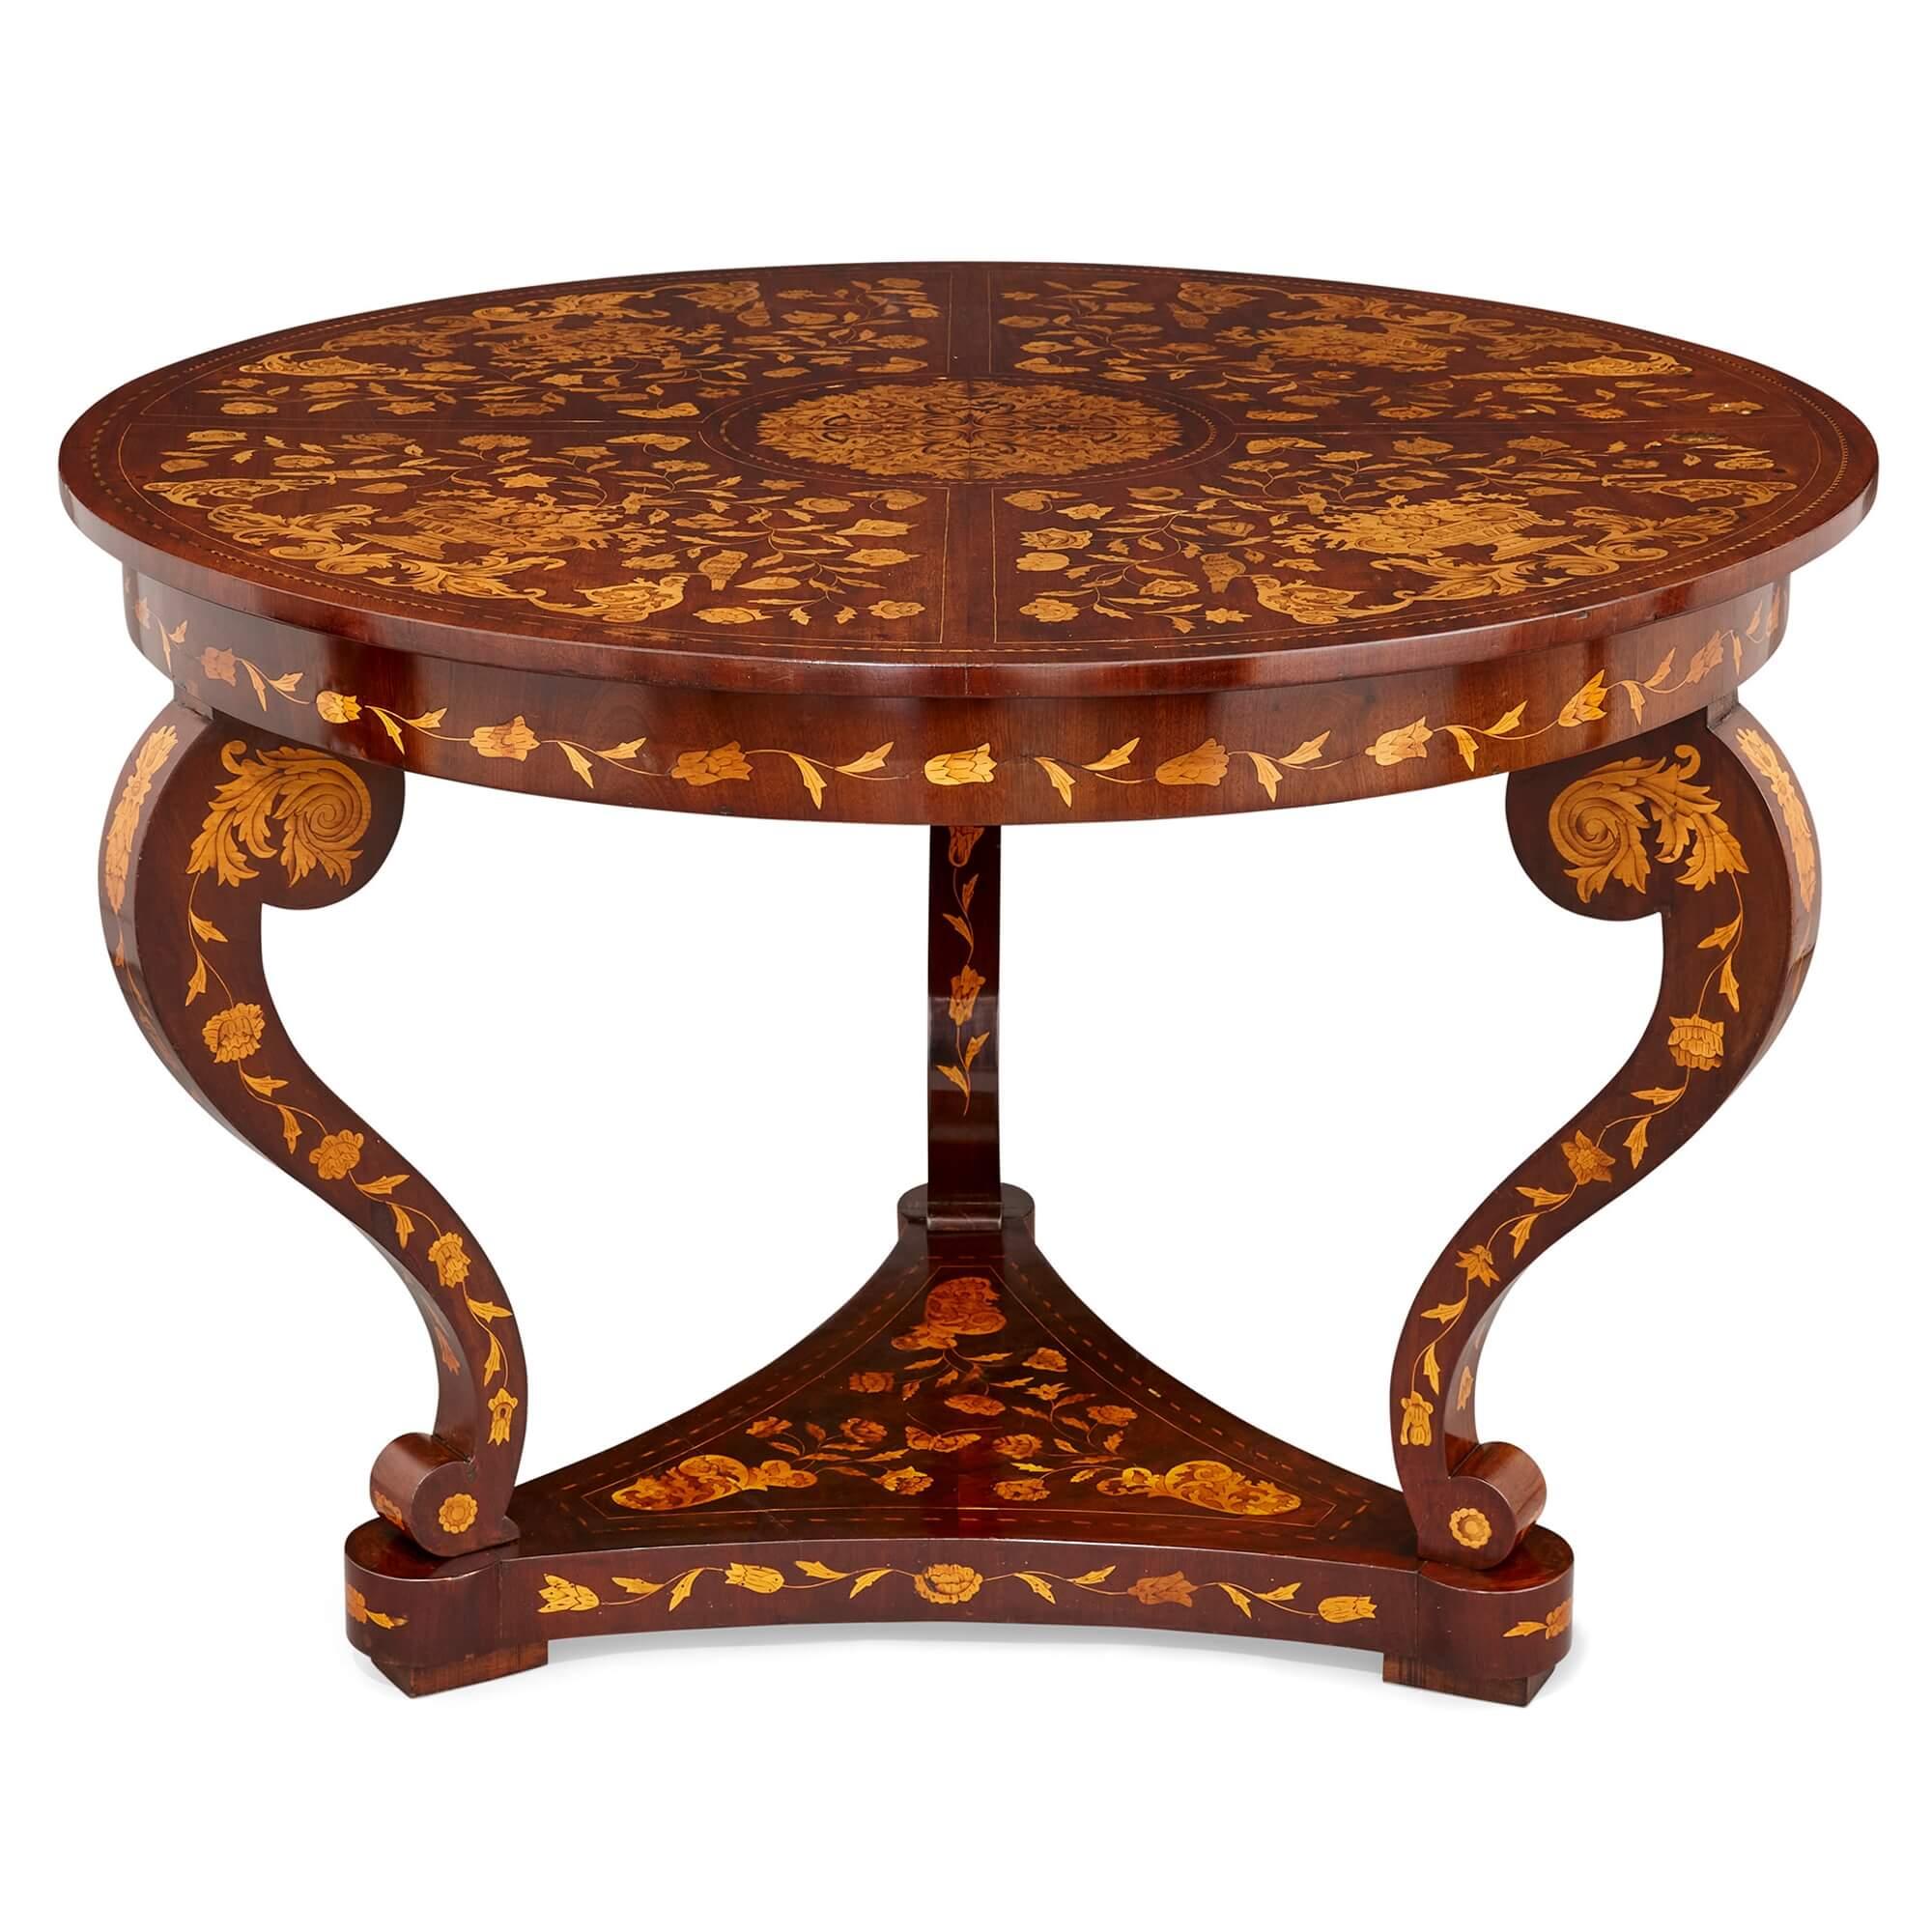 An antique French circular marquetry table with floral inlay
French, early 20th century
Measures: Height 76cm, diameter 108cm

This fine antique table features an extensive, bright marquetry decorative design that adorns each face and surface,